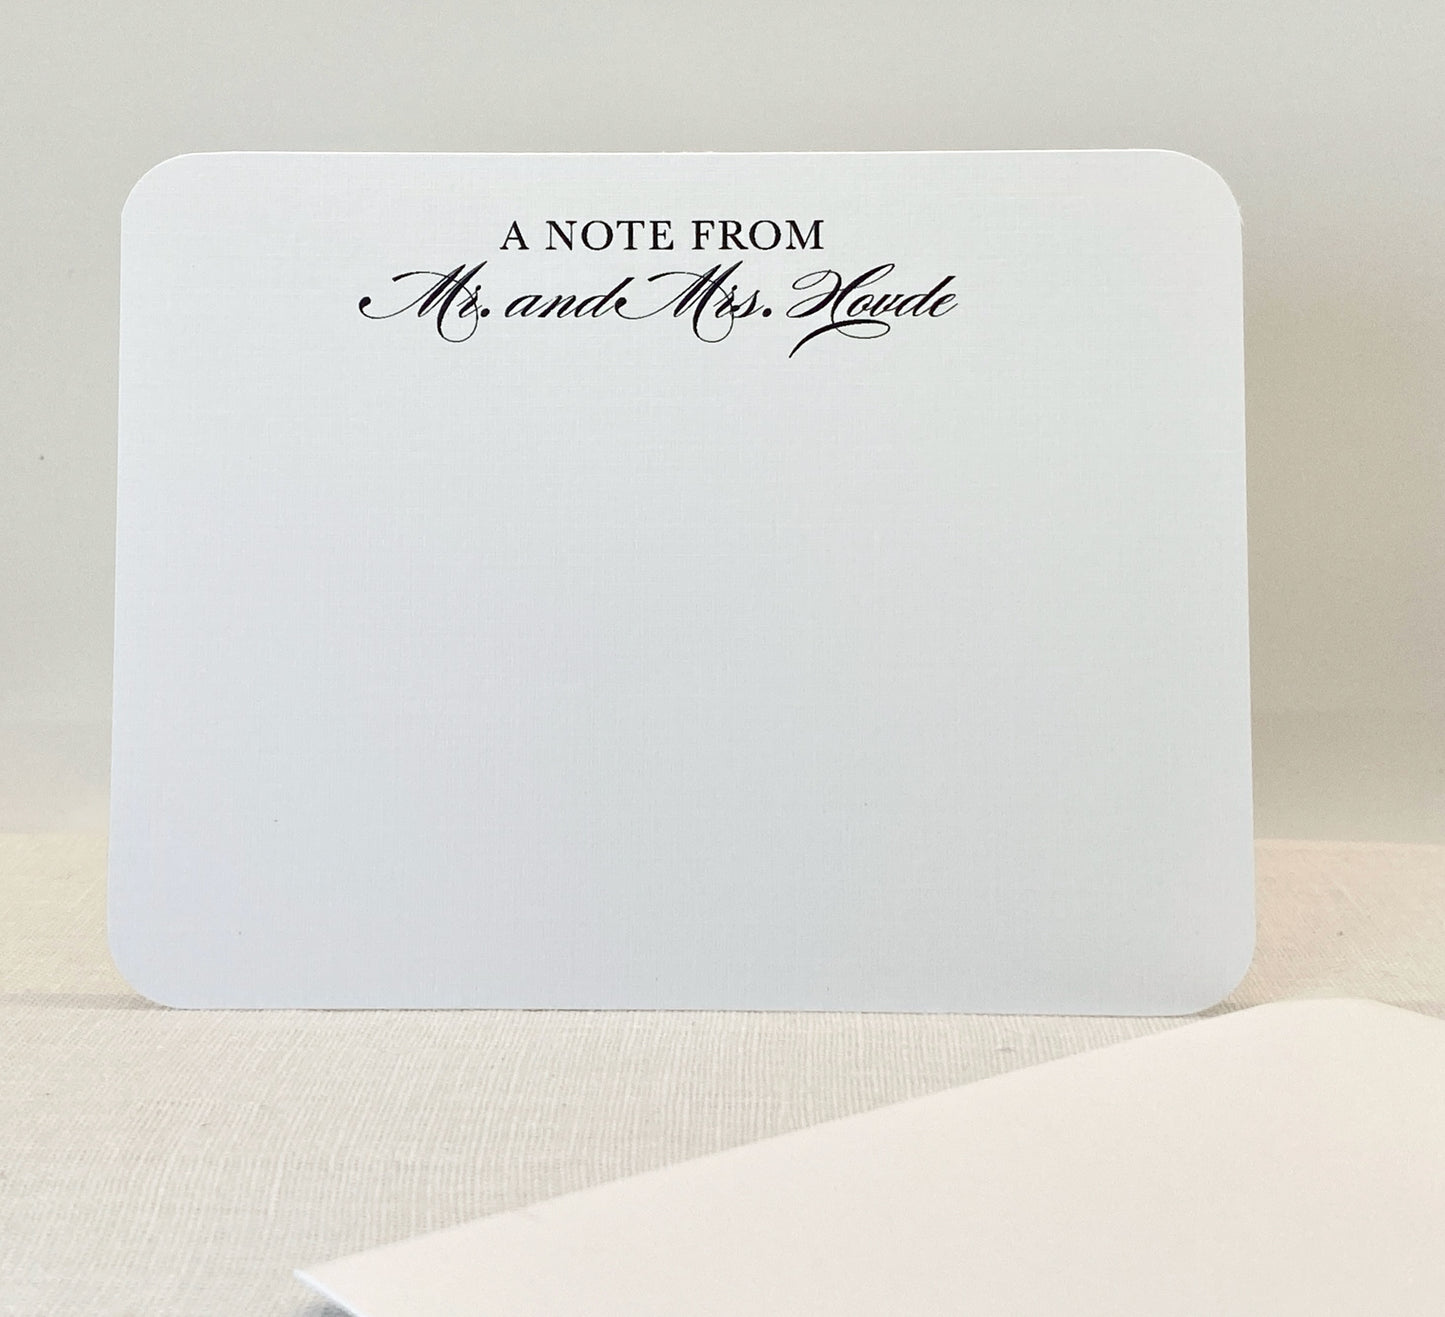 Personalized Note Cards, " A Note From" Personalized Note Card,Set of 20